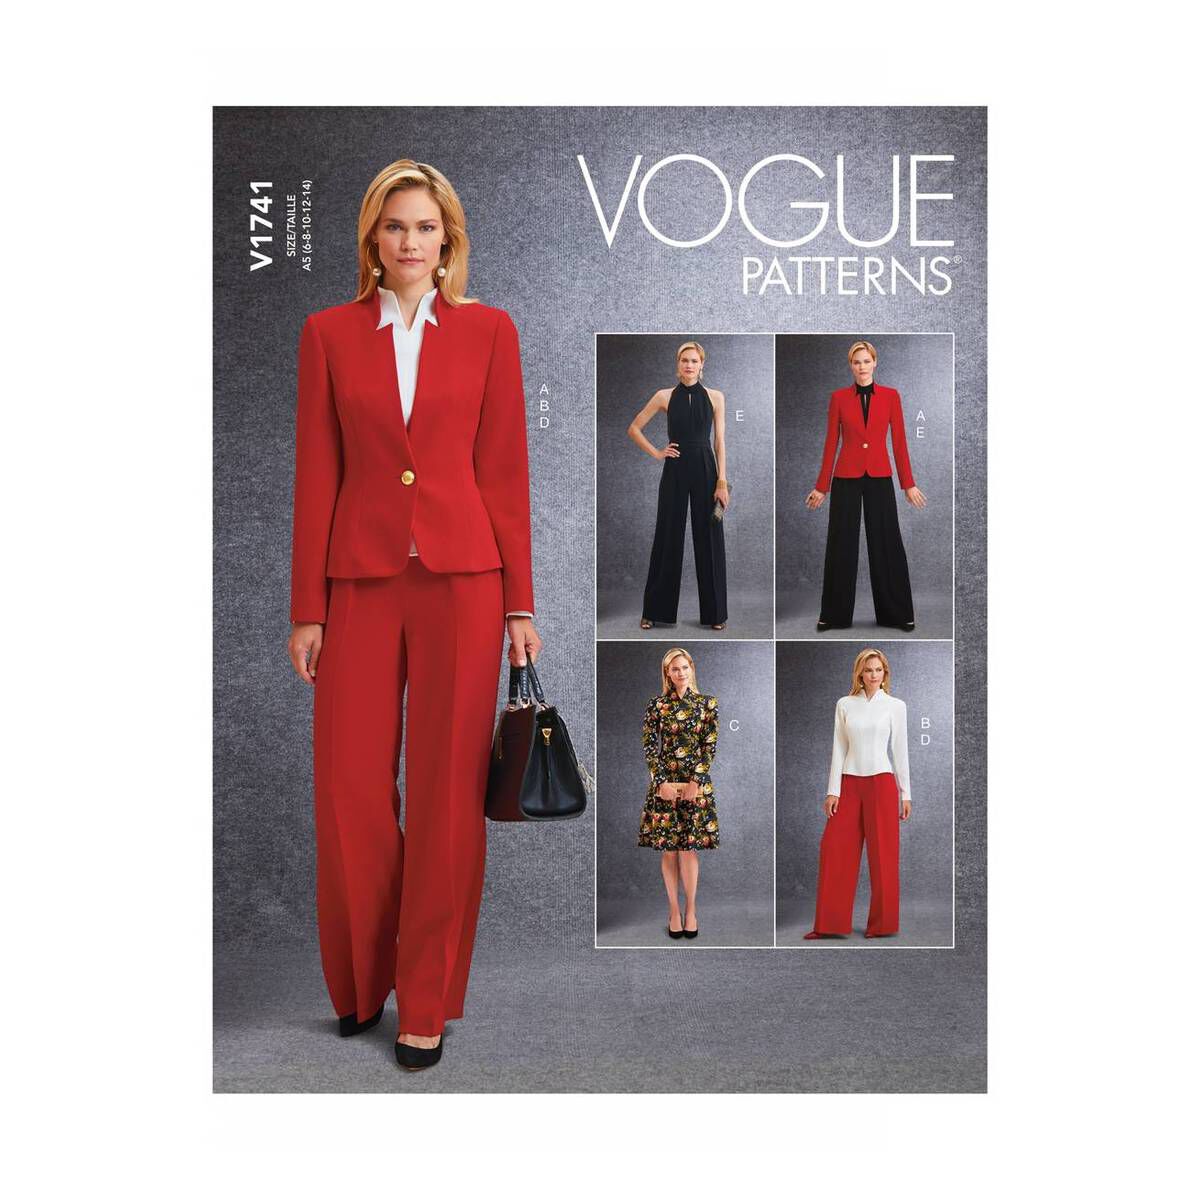 Sewing pattern Vogue trouser suit 1870 Size 3442 EnGerFr  Fabrics  Hemmers